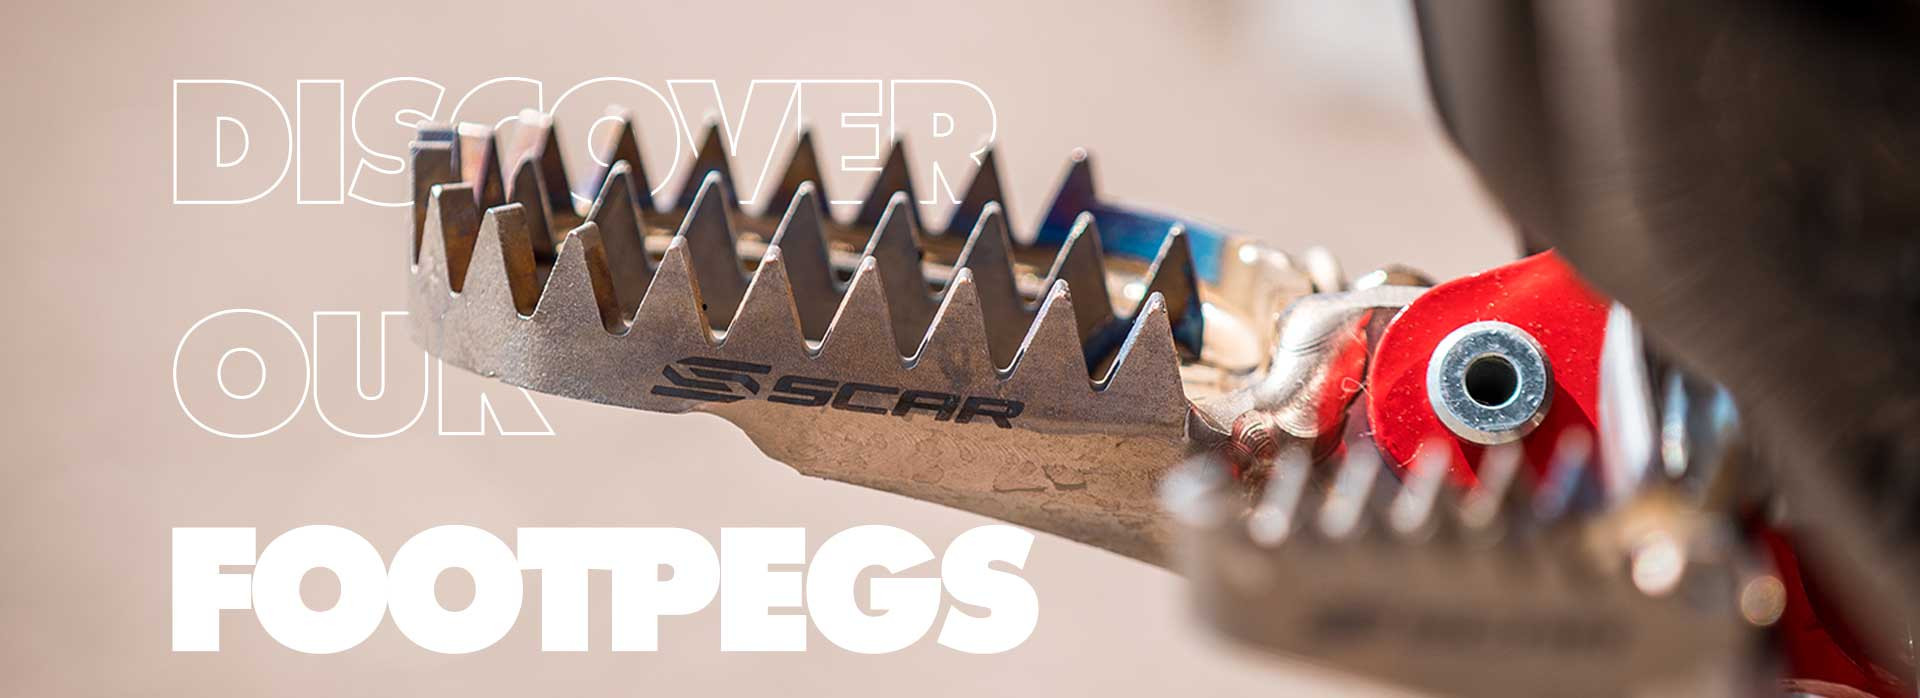 Discover our footpegs